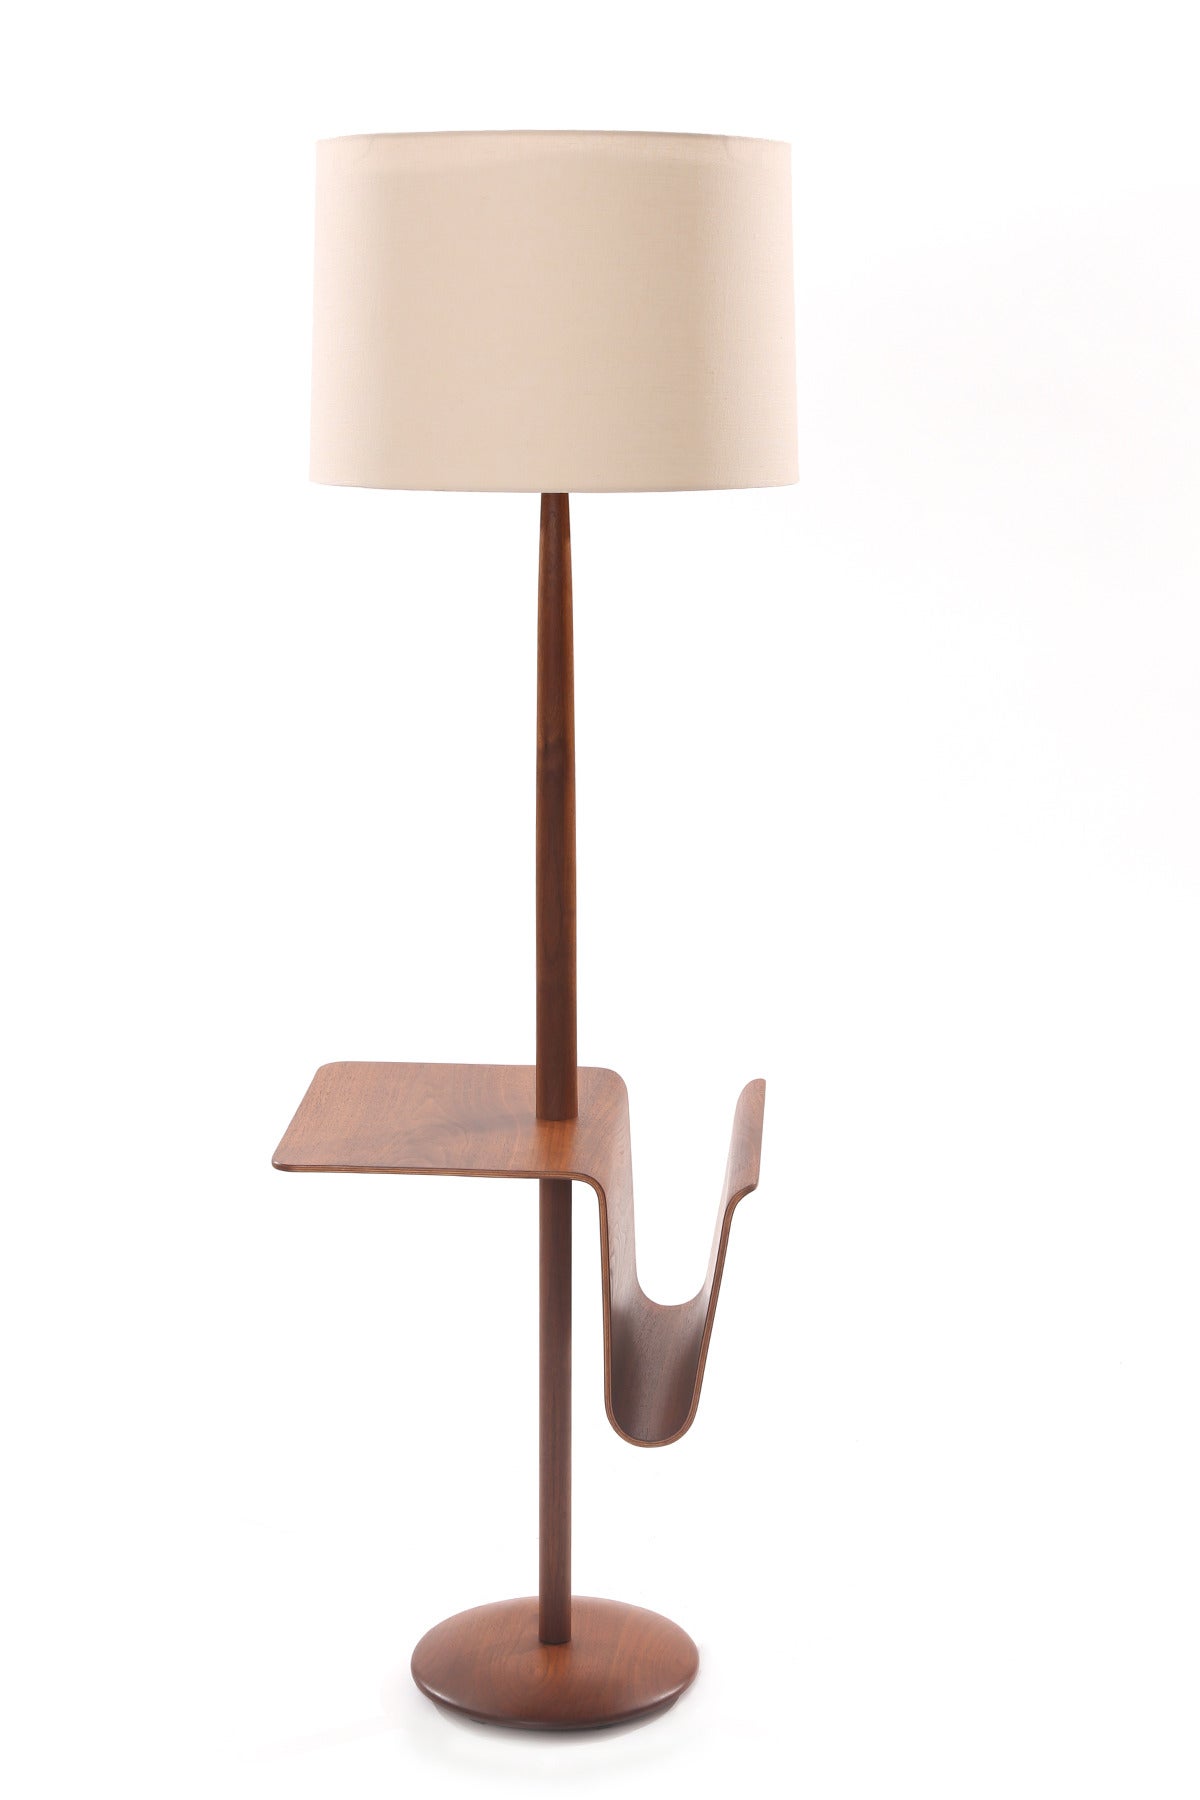 Sculptural oiled walnut floor lamp with magazine holder, circa mid-1960s. This lovely example has a solid walnut pole with a bentwood beautifully grained magazine holder. Price listed does not include the shade.